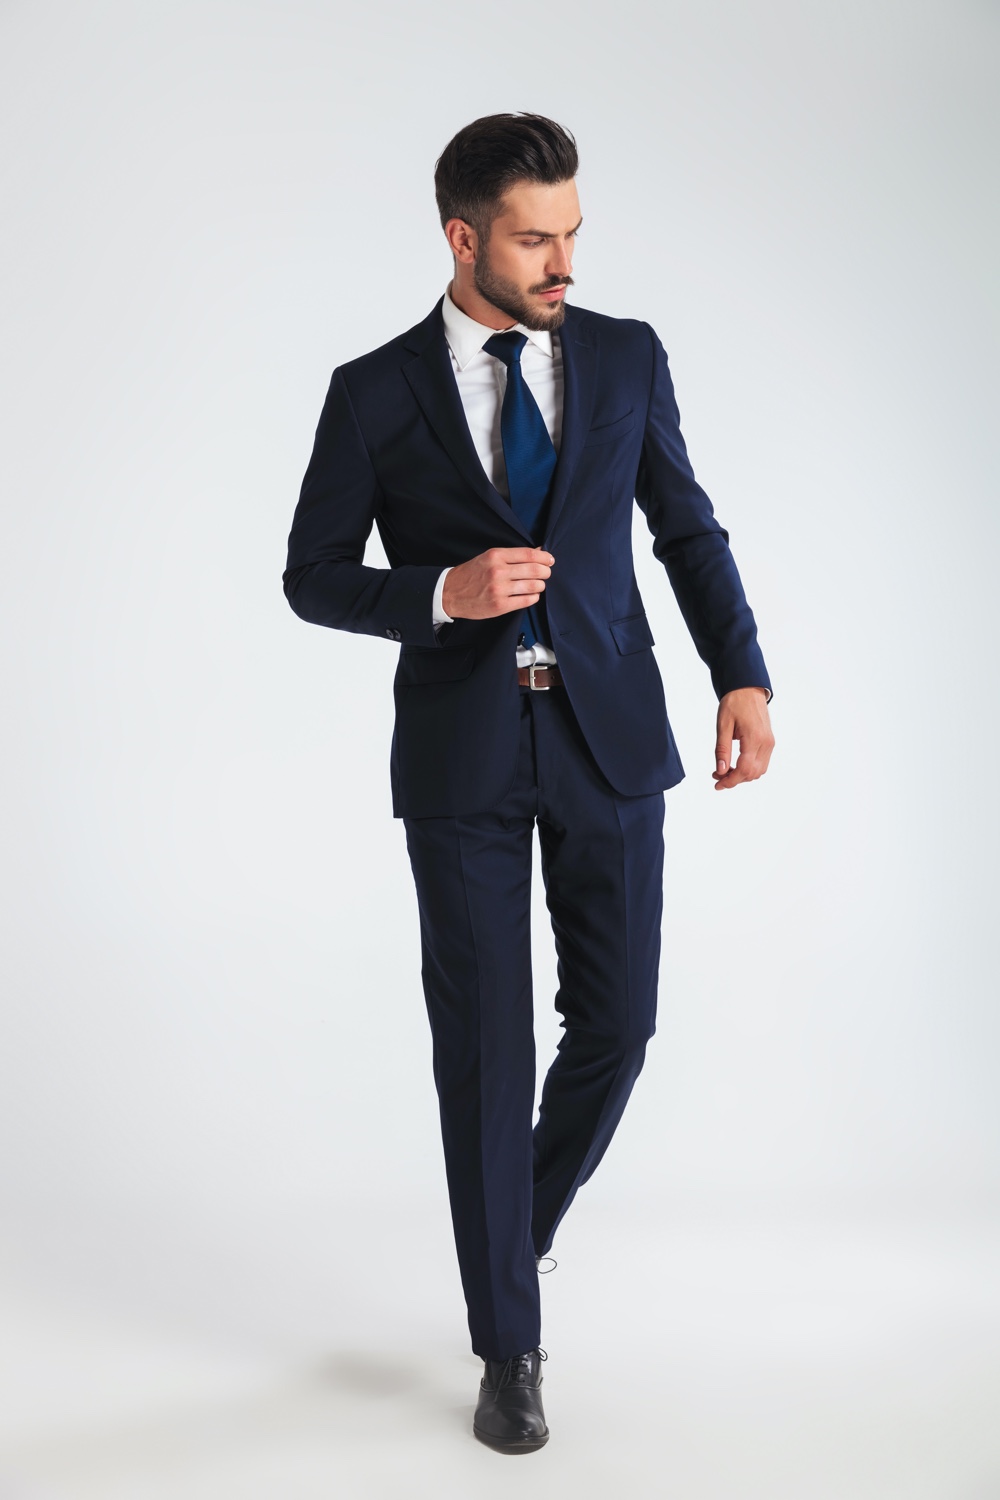 Man in Sharply Tailored Suit